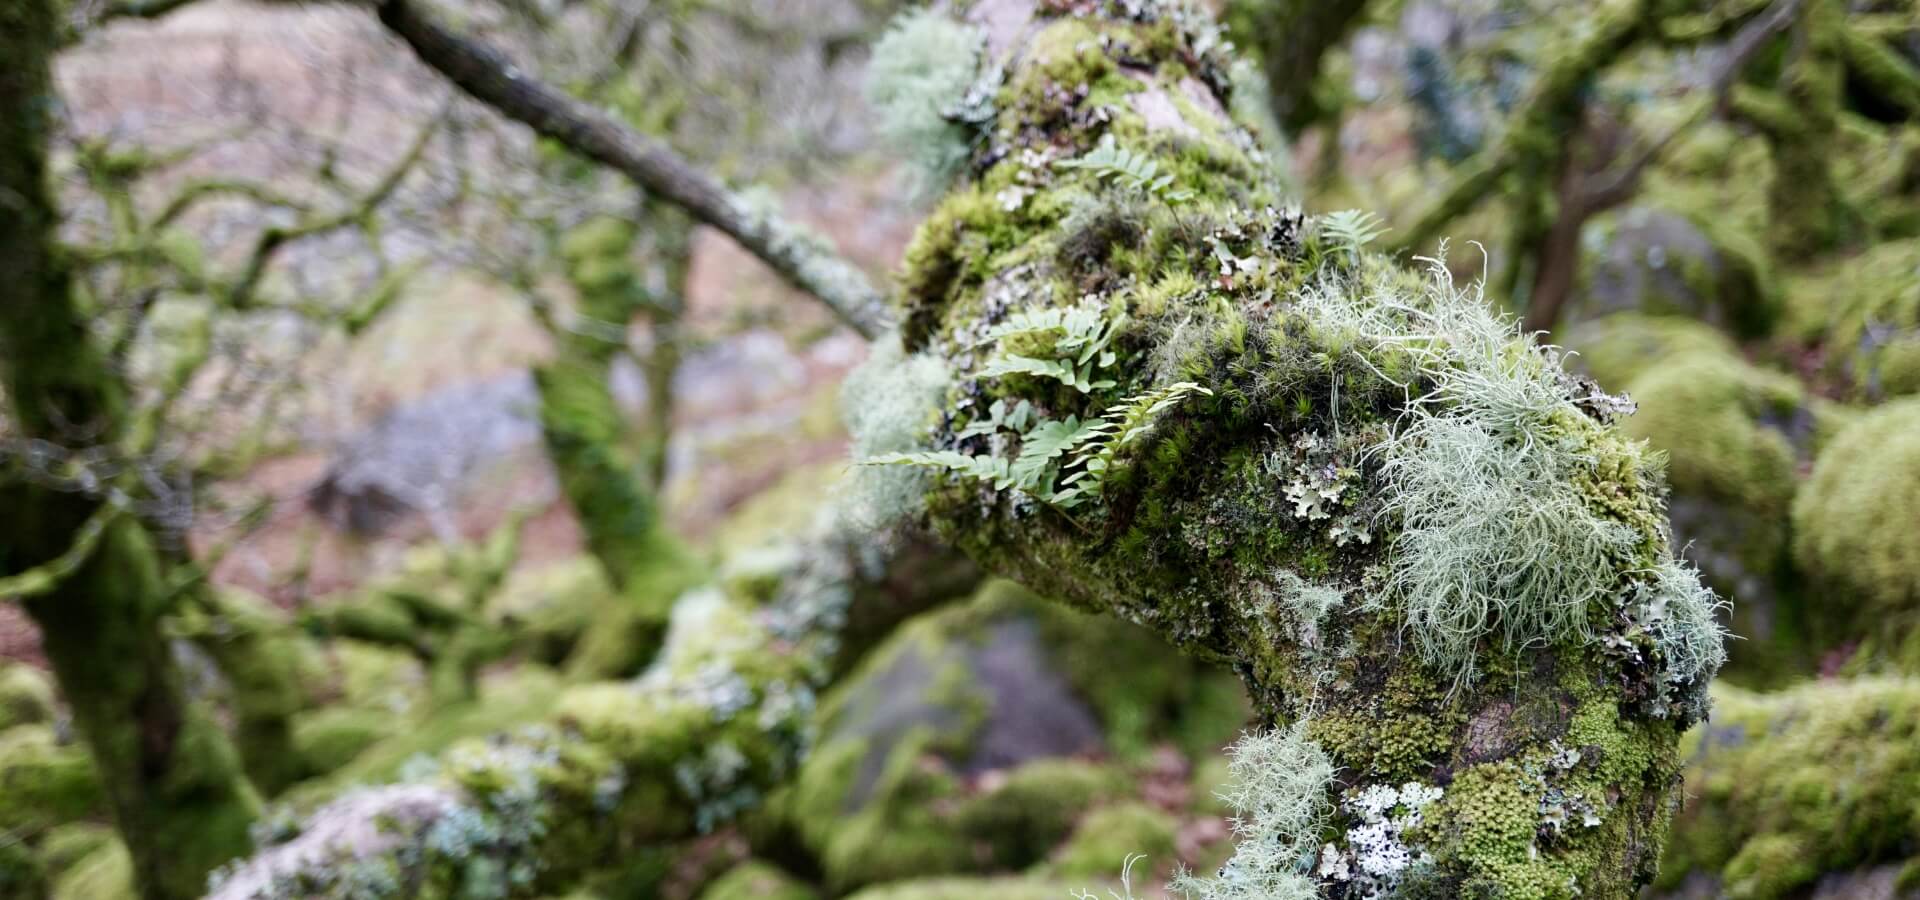 Beard-lichens, horsehair-lichens, mosses, liverworts and polypody ferns on an oak branch in Dartmoor (c) Dave Lamacraft